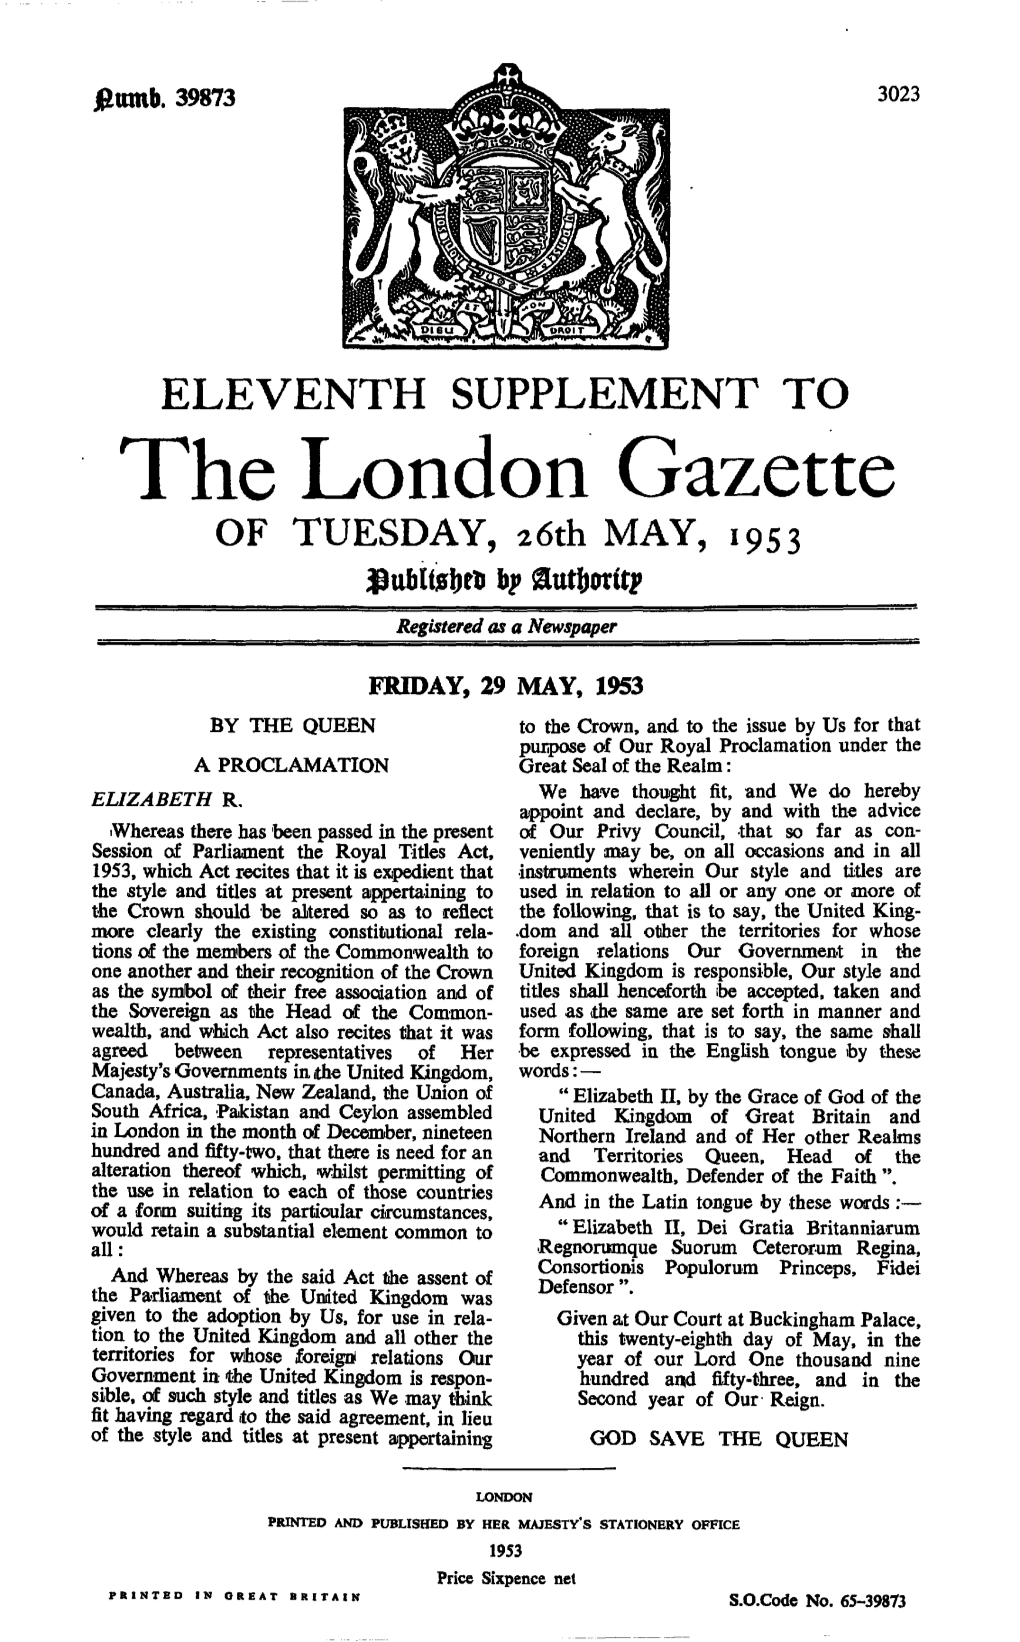 The London Gazette of TUESDAY, 26Th MAY, 1953 Sutfroritp Registered As a Newspaper